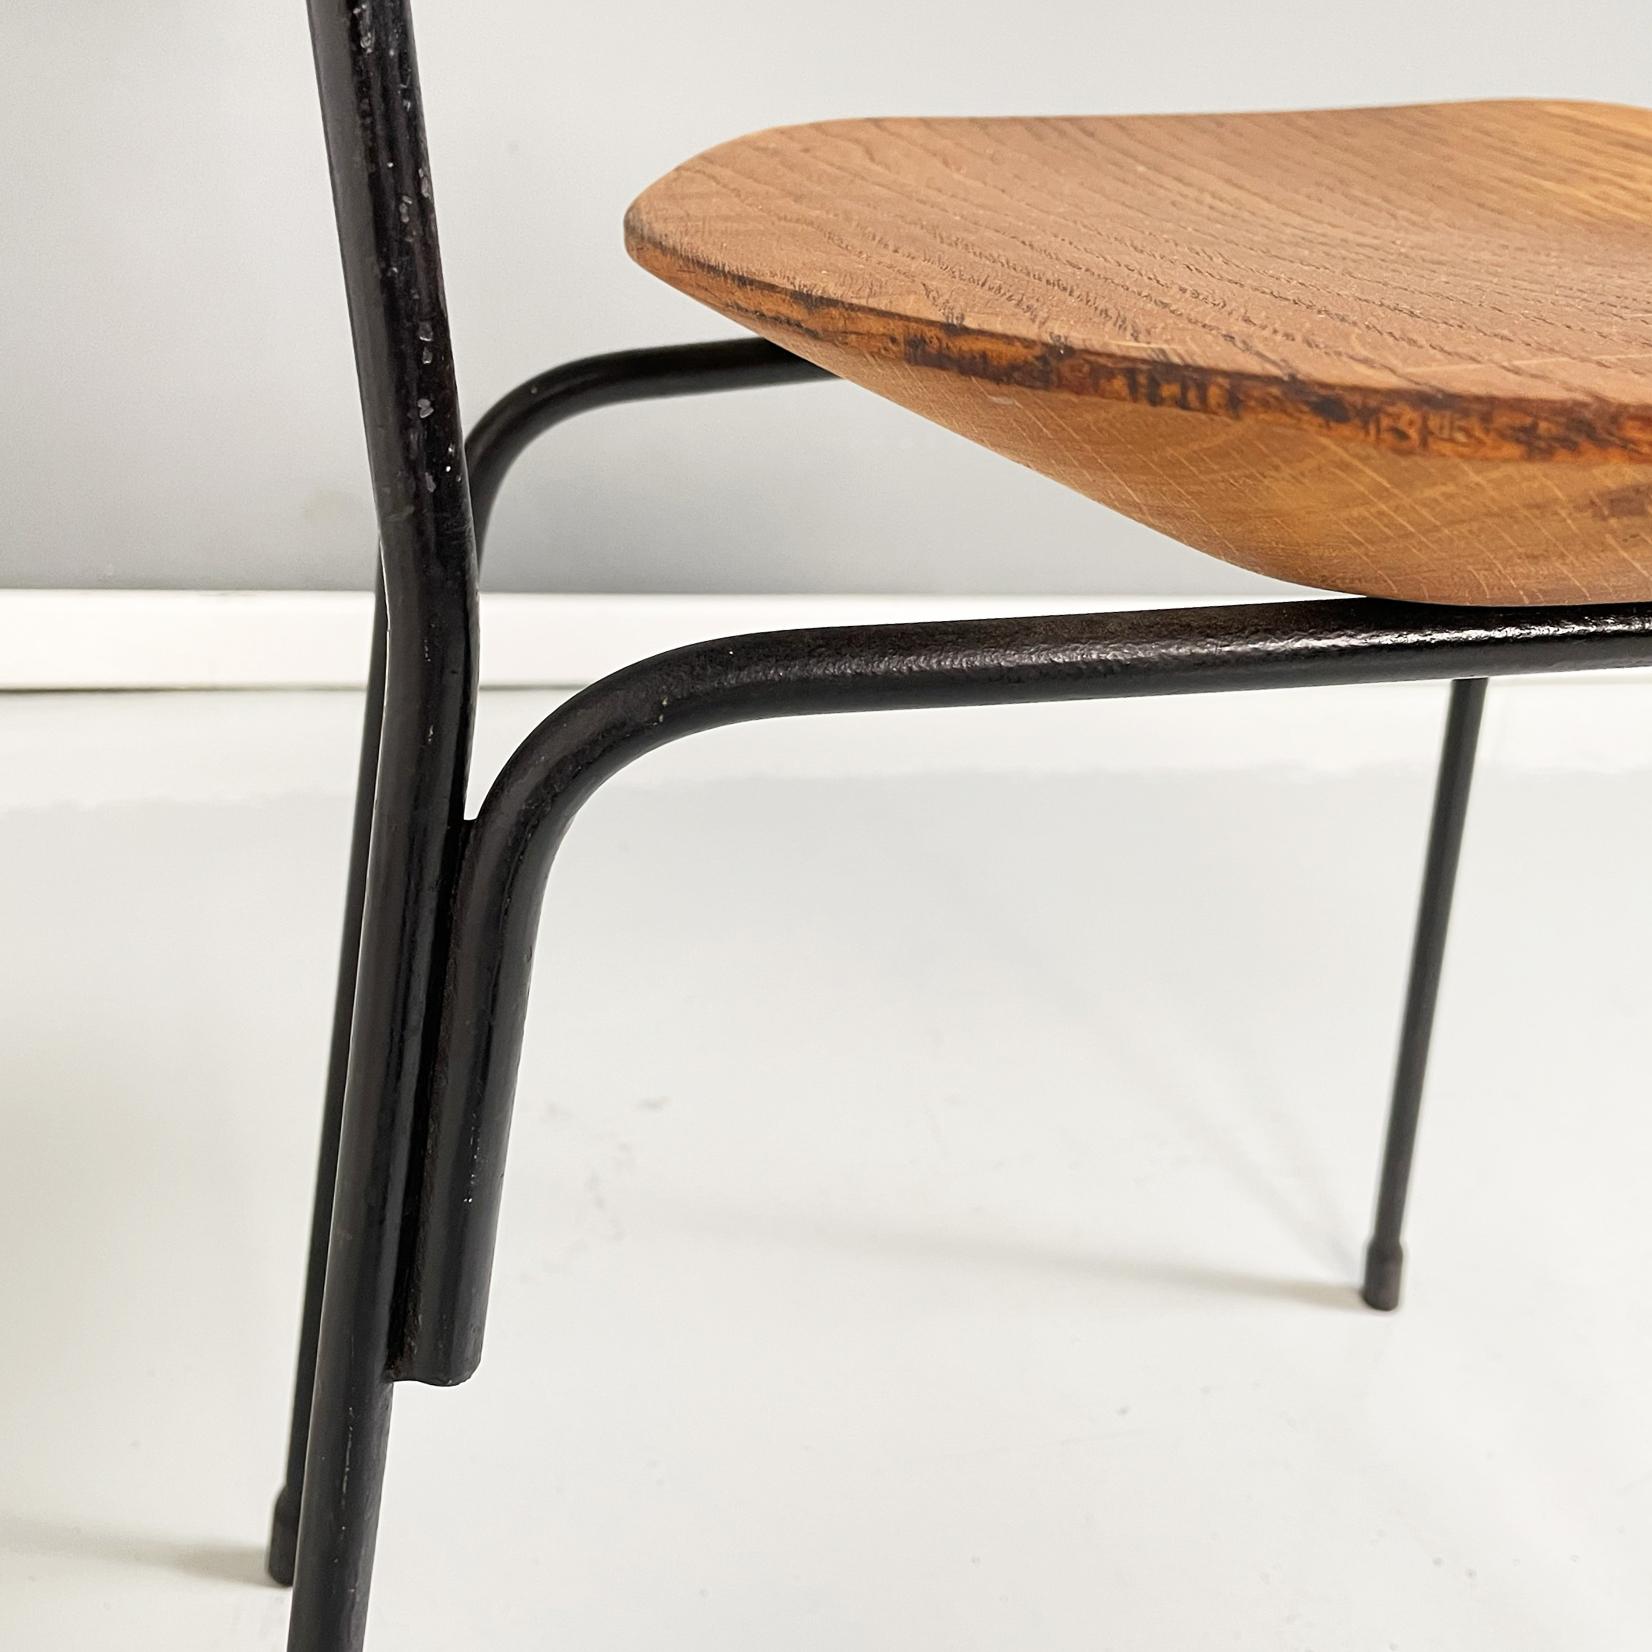 Italian Mid-Century Wooden and Black Enamelled Metal Rod Chair, 1950s For Sale 4